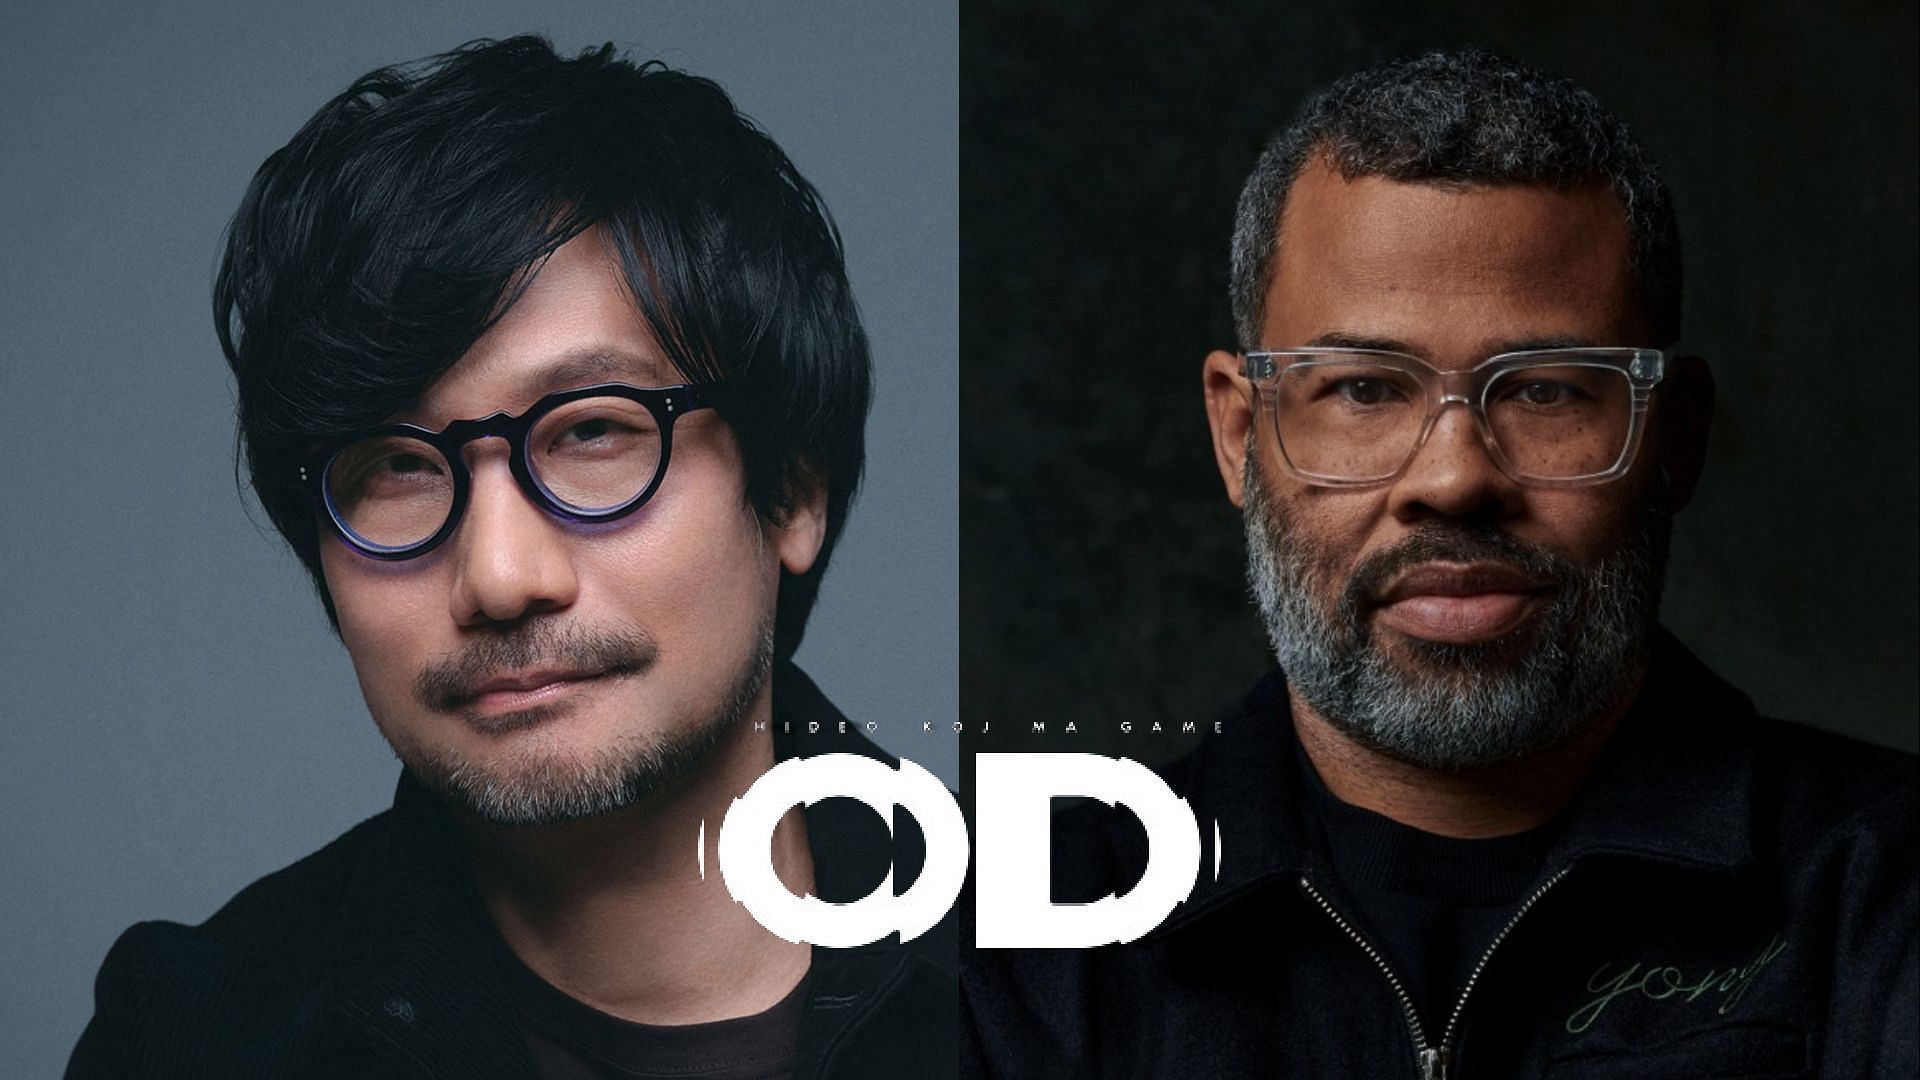 Jordan Peele and Hideo Kojima are collaborating on a horror game - Games